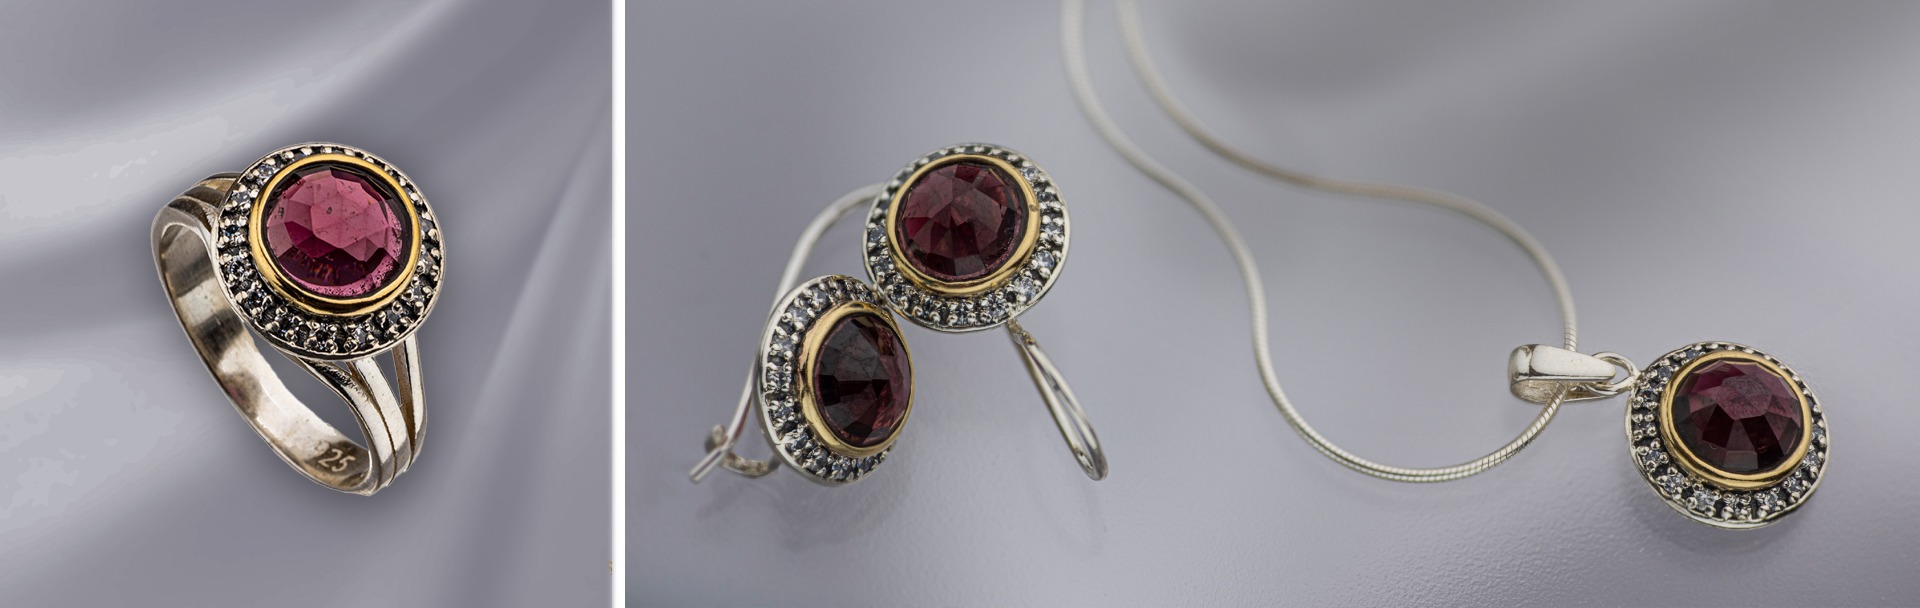 925 Sterling Silver & 9K Gold Jewelry set with Garnet and Zircons